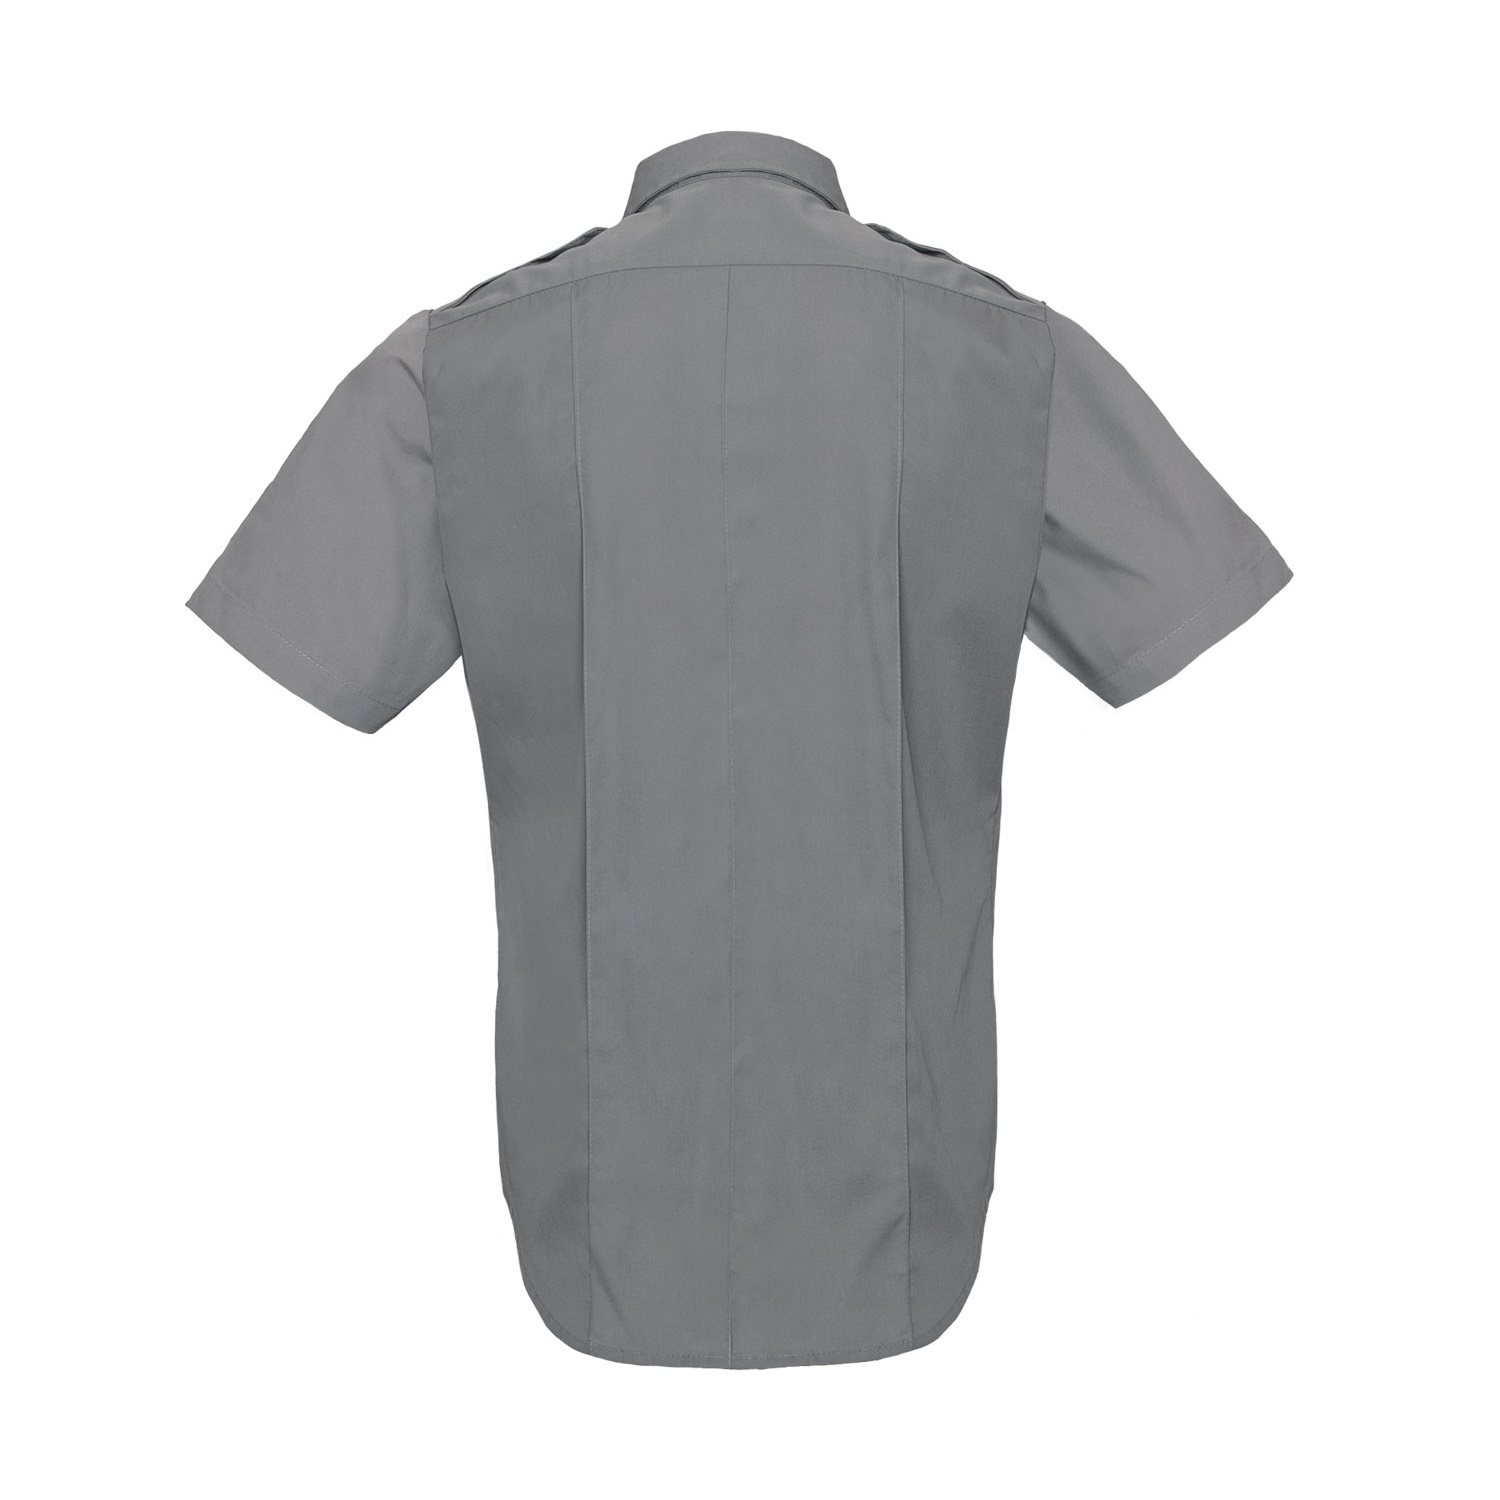 POLICE AND SECURITY shirt short sleeve GRAY ROTHCO 30045 L-11